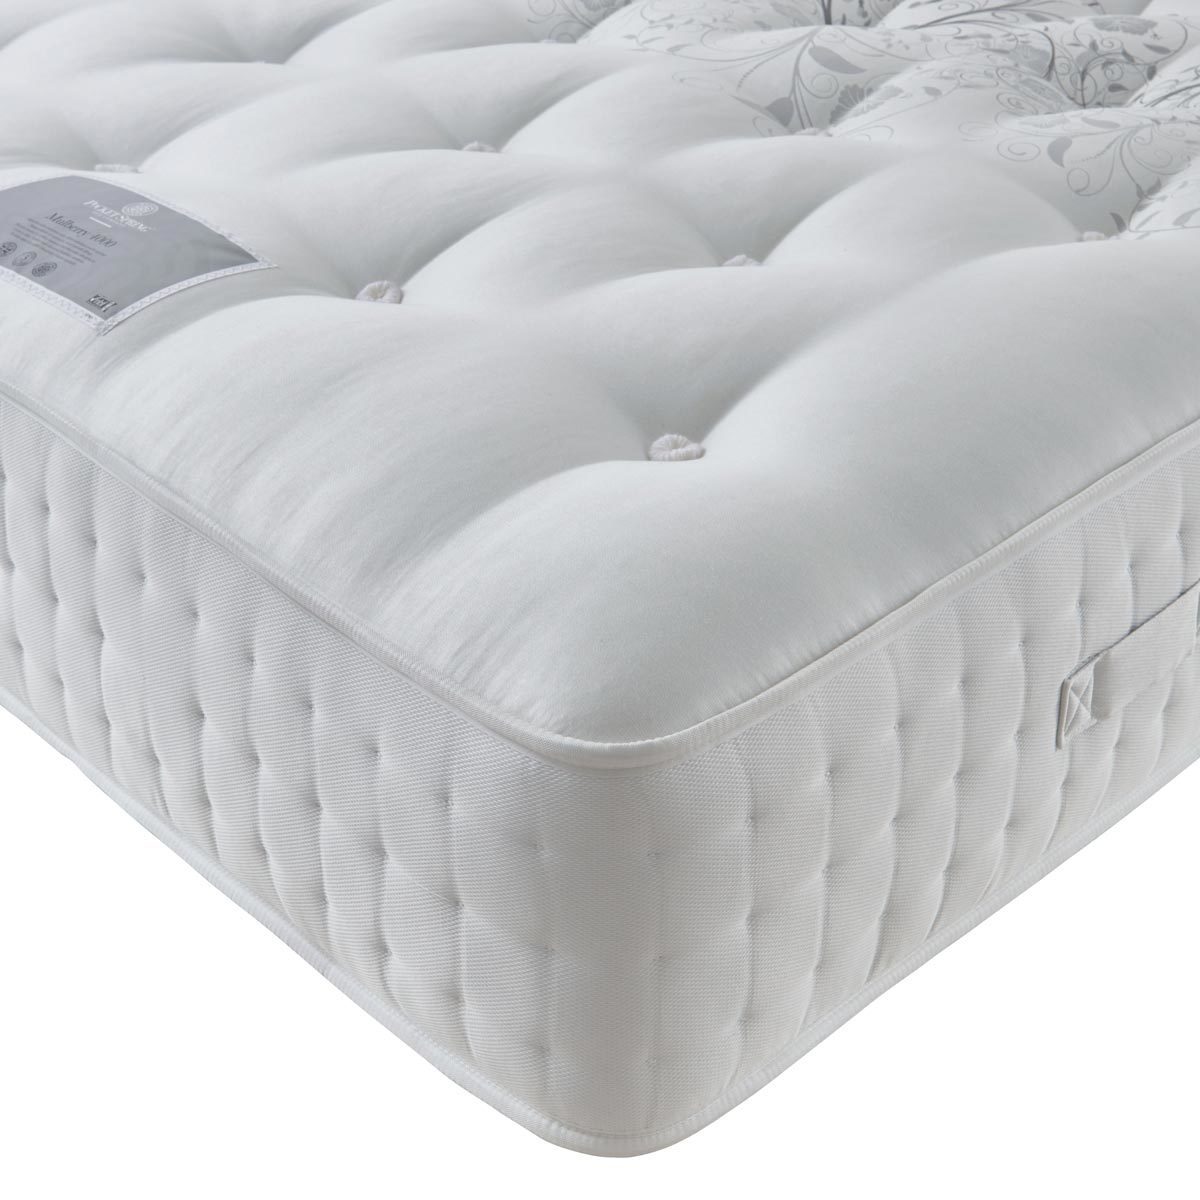 Pocket Spring Bed Company Mulberry Mattress & Fudge Divan with 4 Drawers in 3 Sizes - Signature Retail Stores